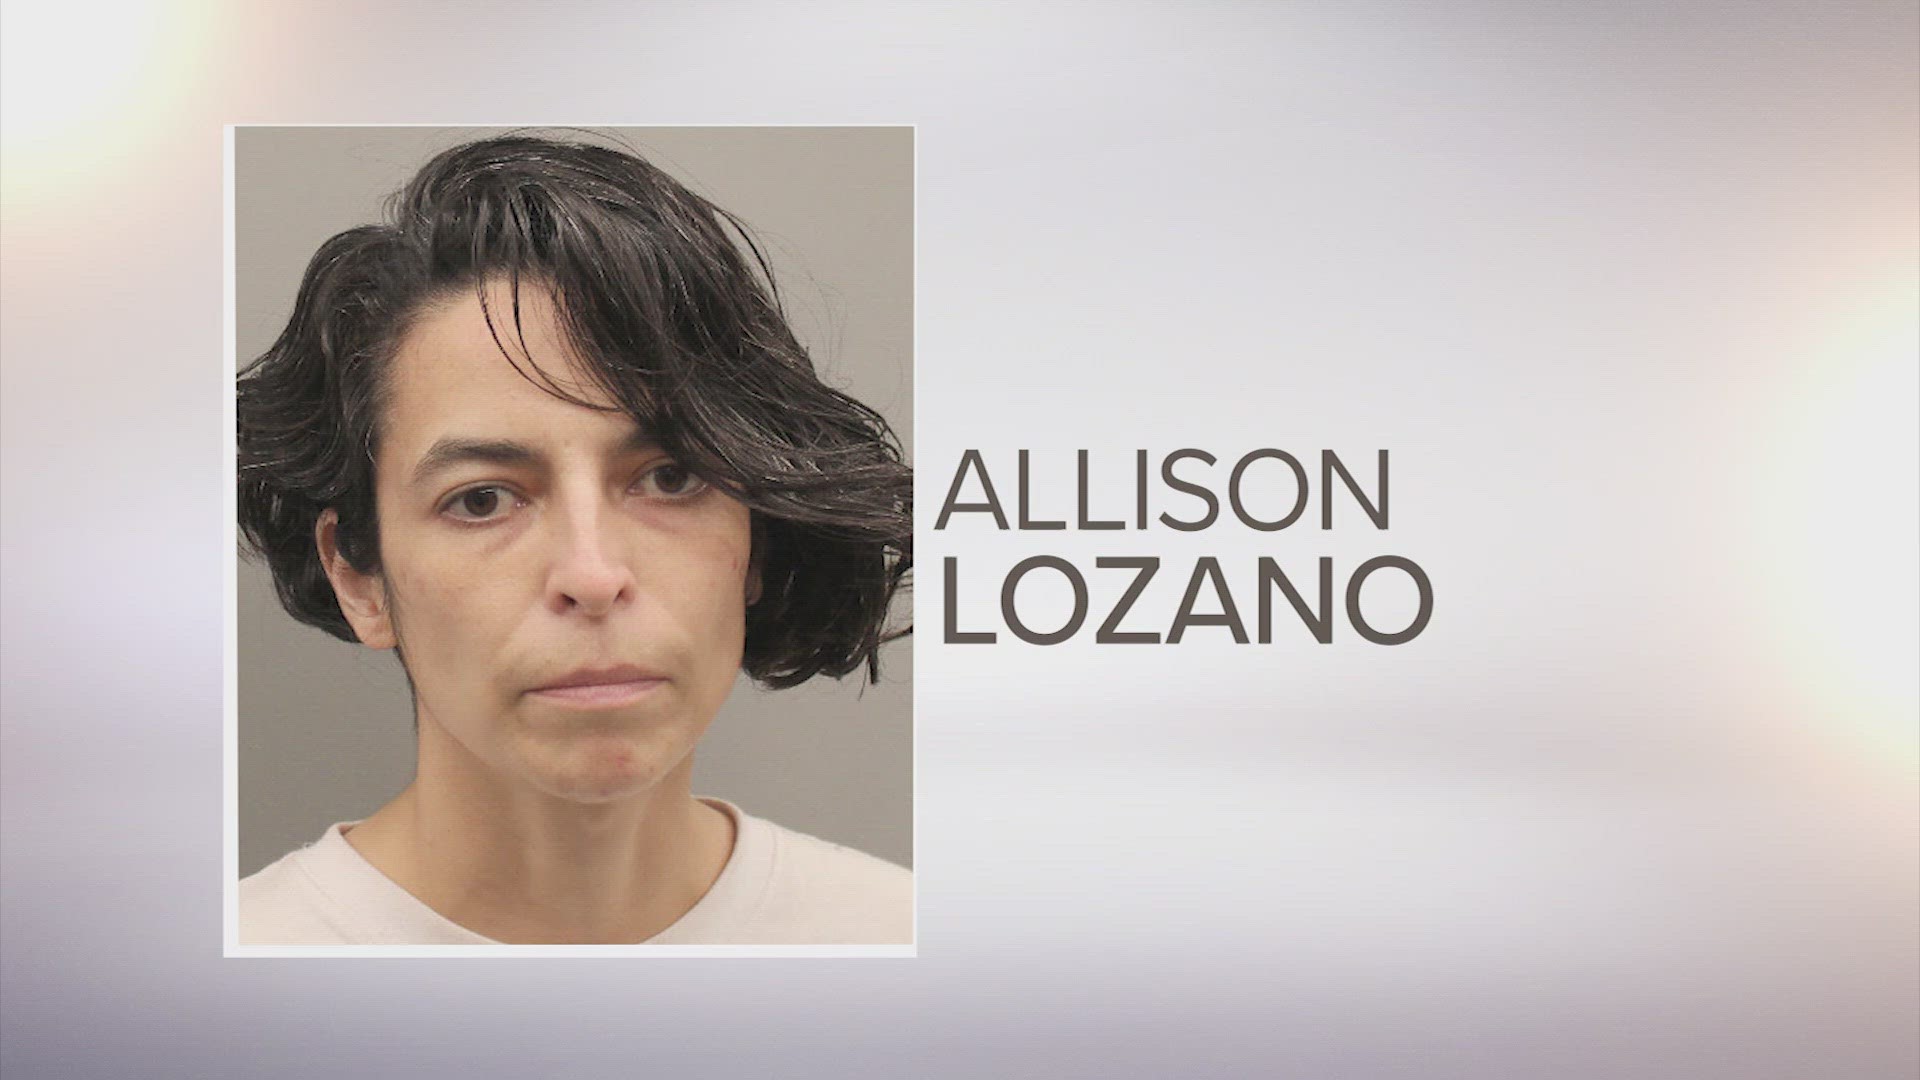 Homicide investigators said Allison Lozano's body appeared to be intentionally dumped in a remote area of Imperial Valley Dr. in north Harris County.